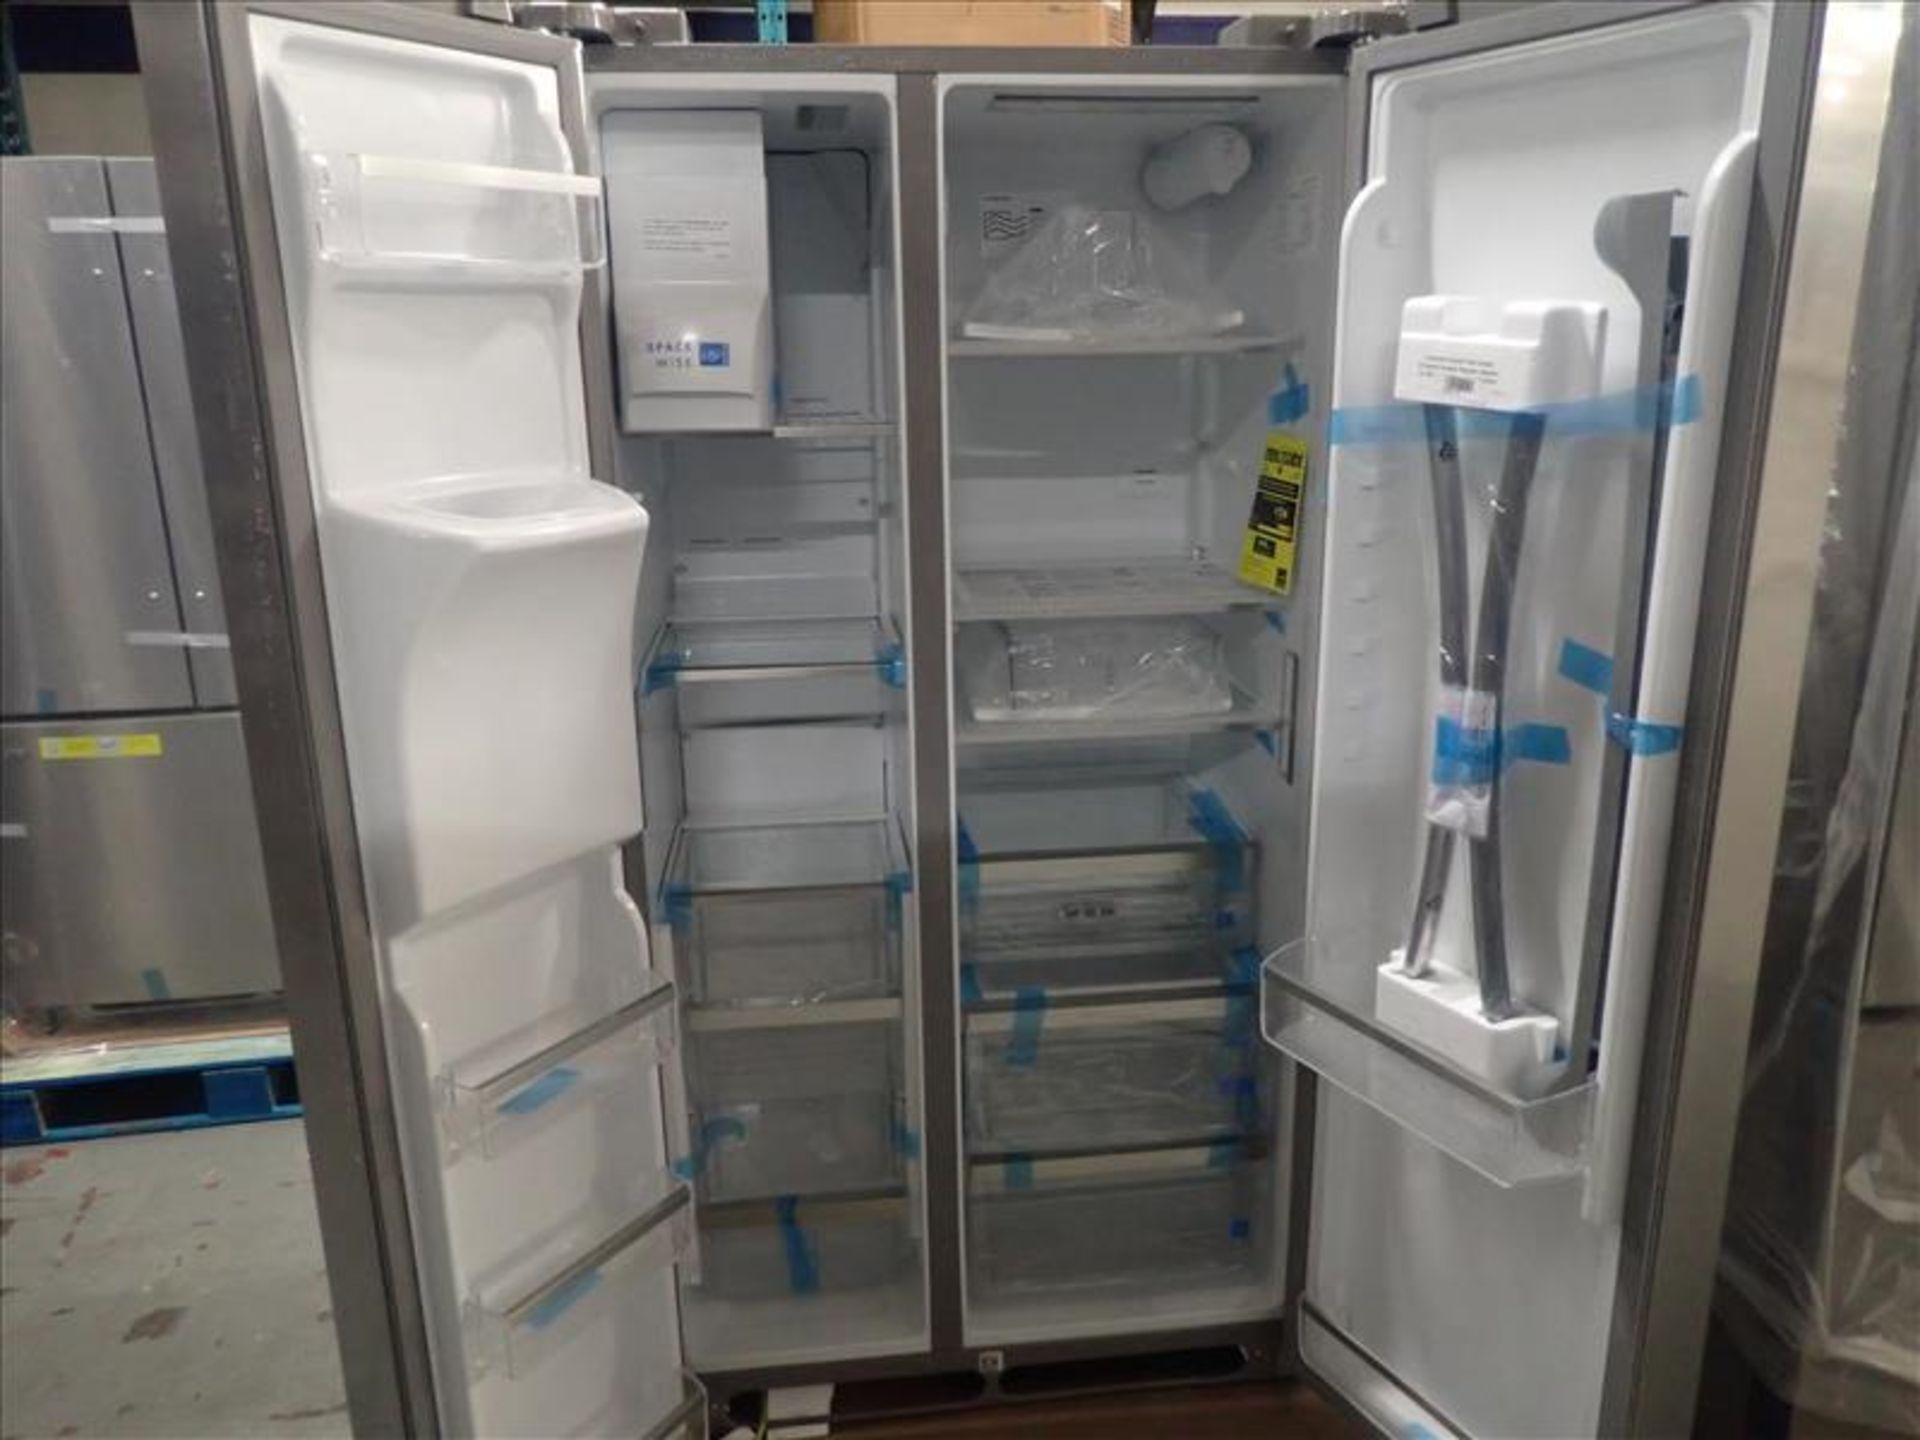 Electrolux french door refrigerator, mod. GRSC2352AF1, ice maker, stainless steel finish, 36 in. W x - Image 3 of 5